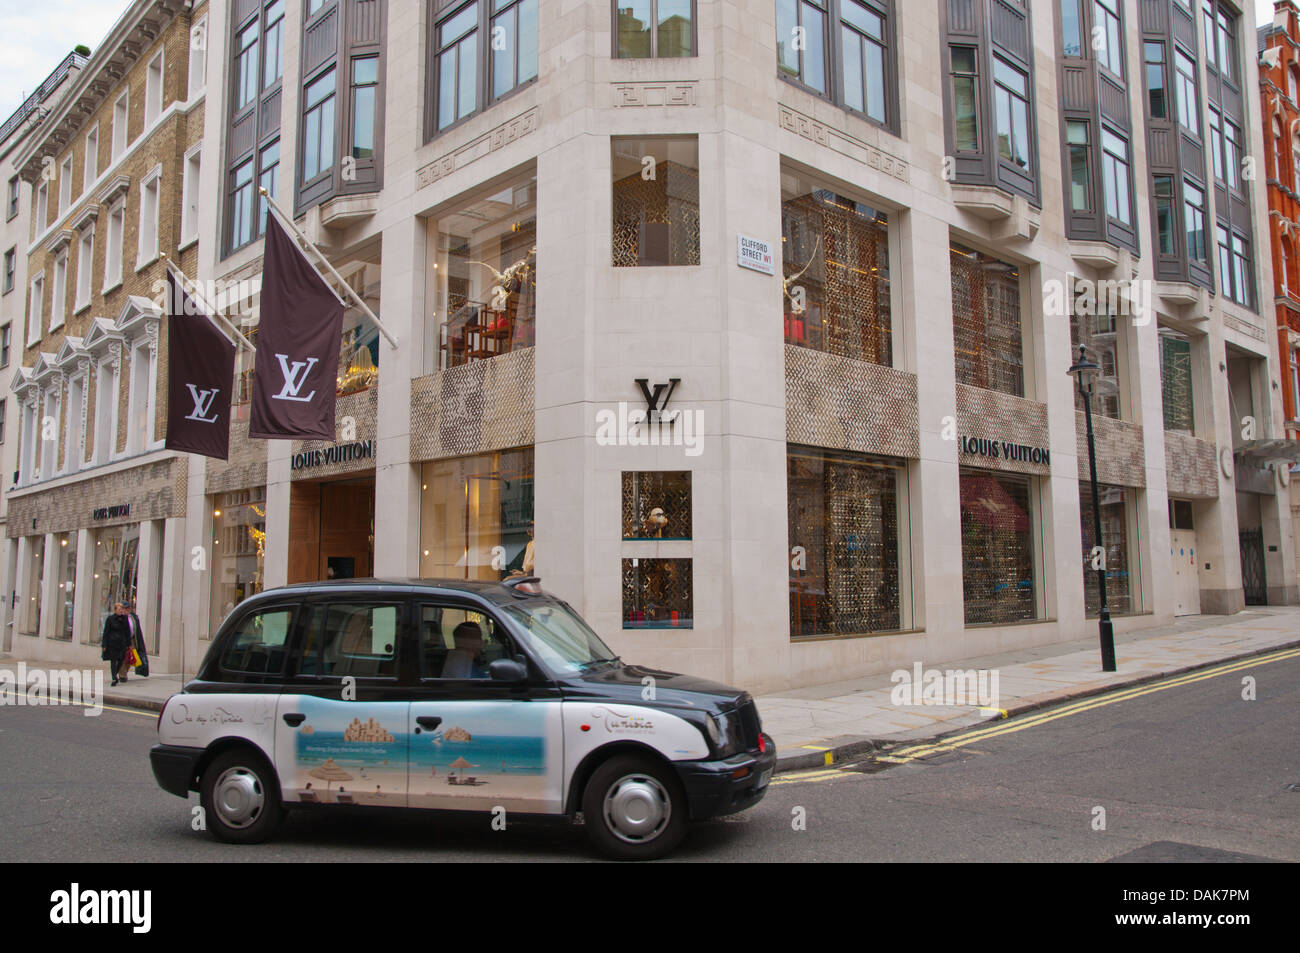 Front facade of Louis Vuitton Flagship store in New Bond Street, London  Stock Photo - Alamy